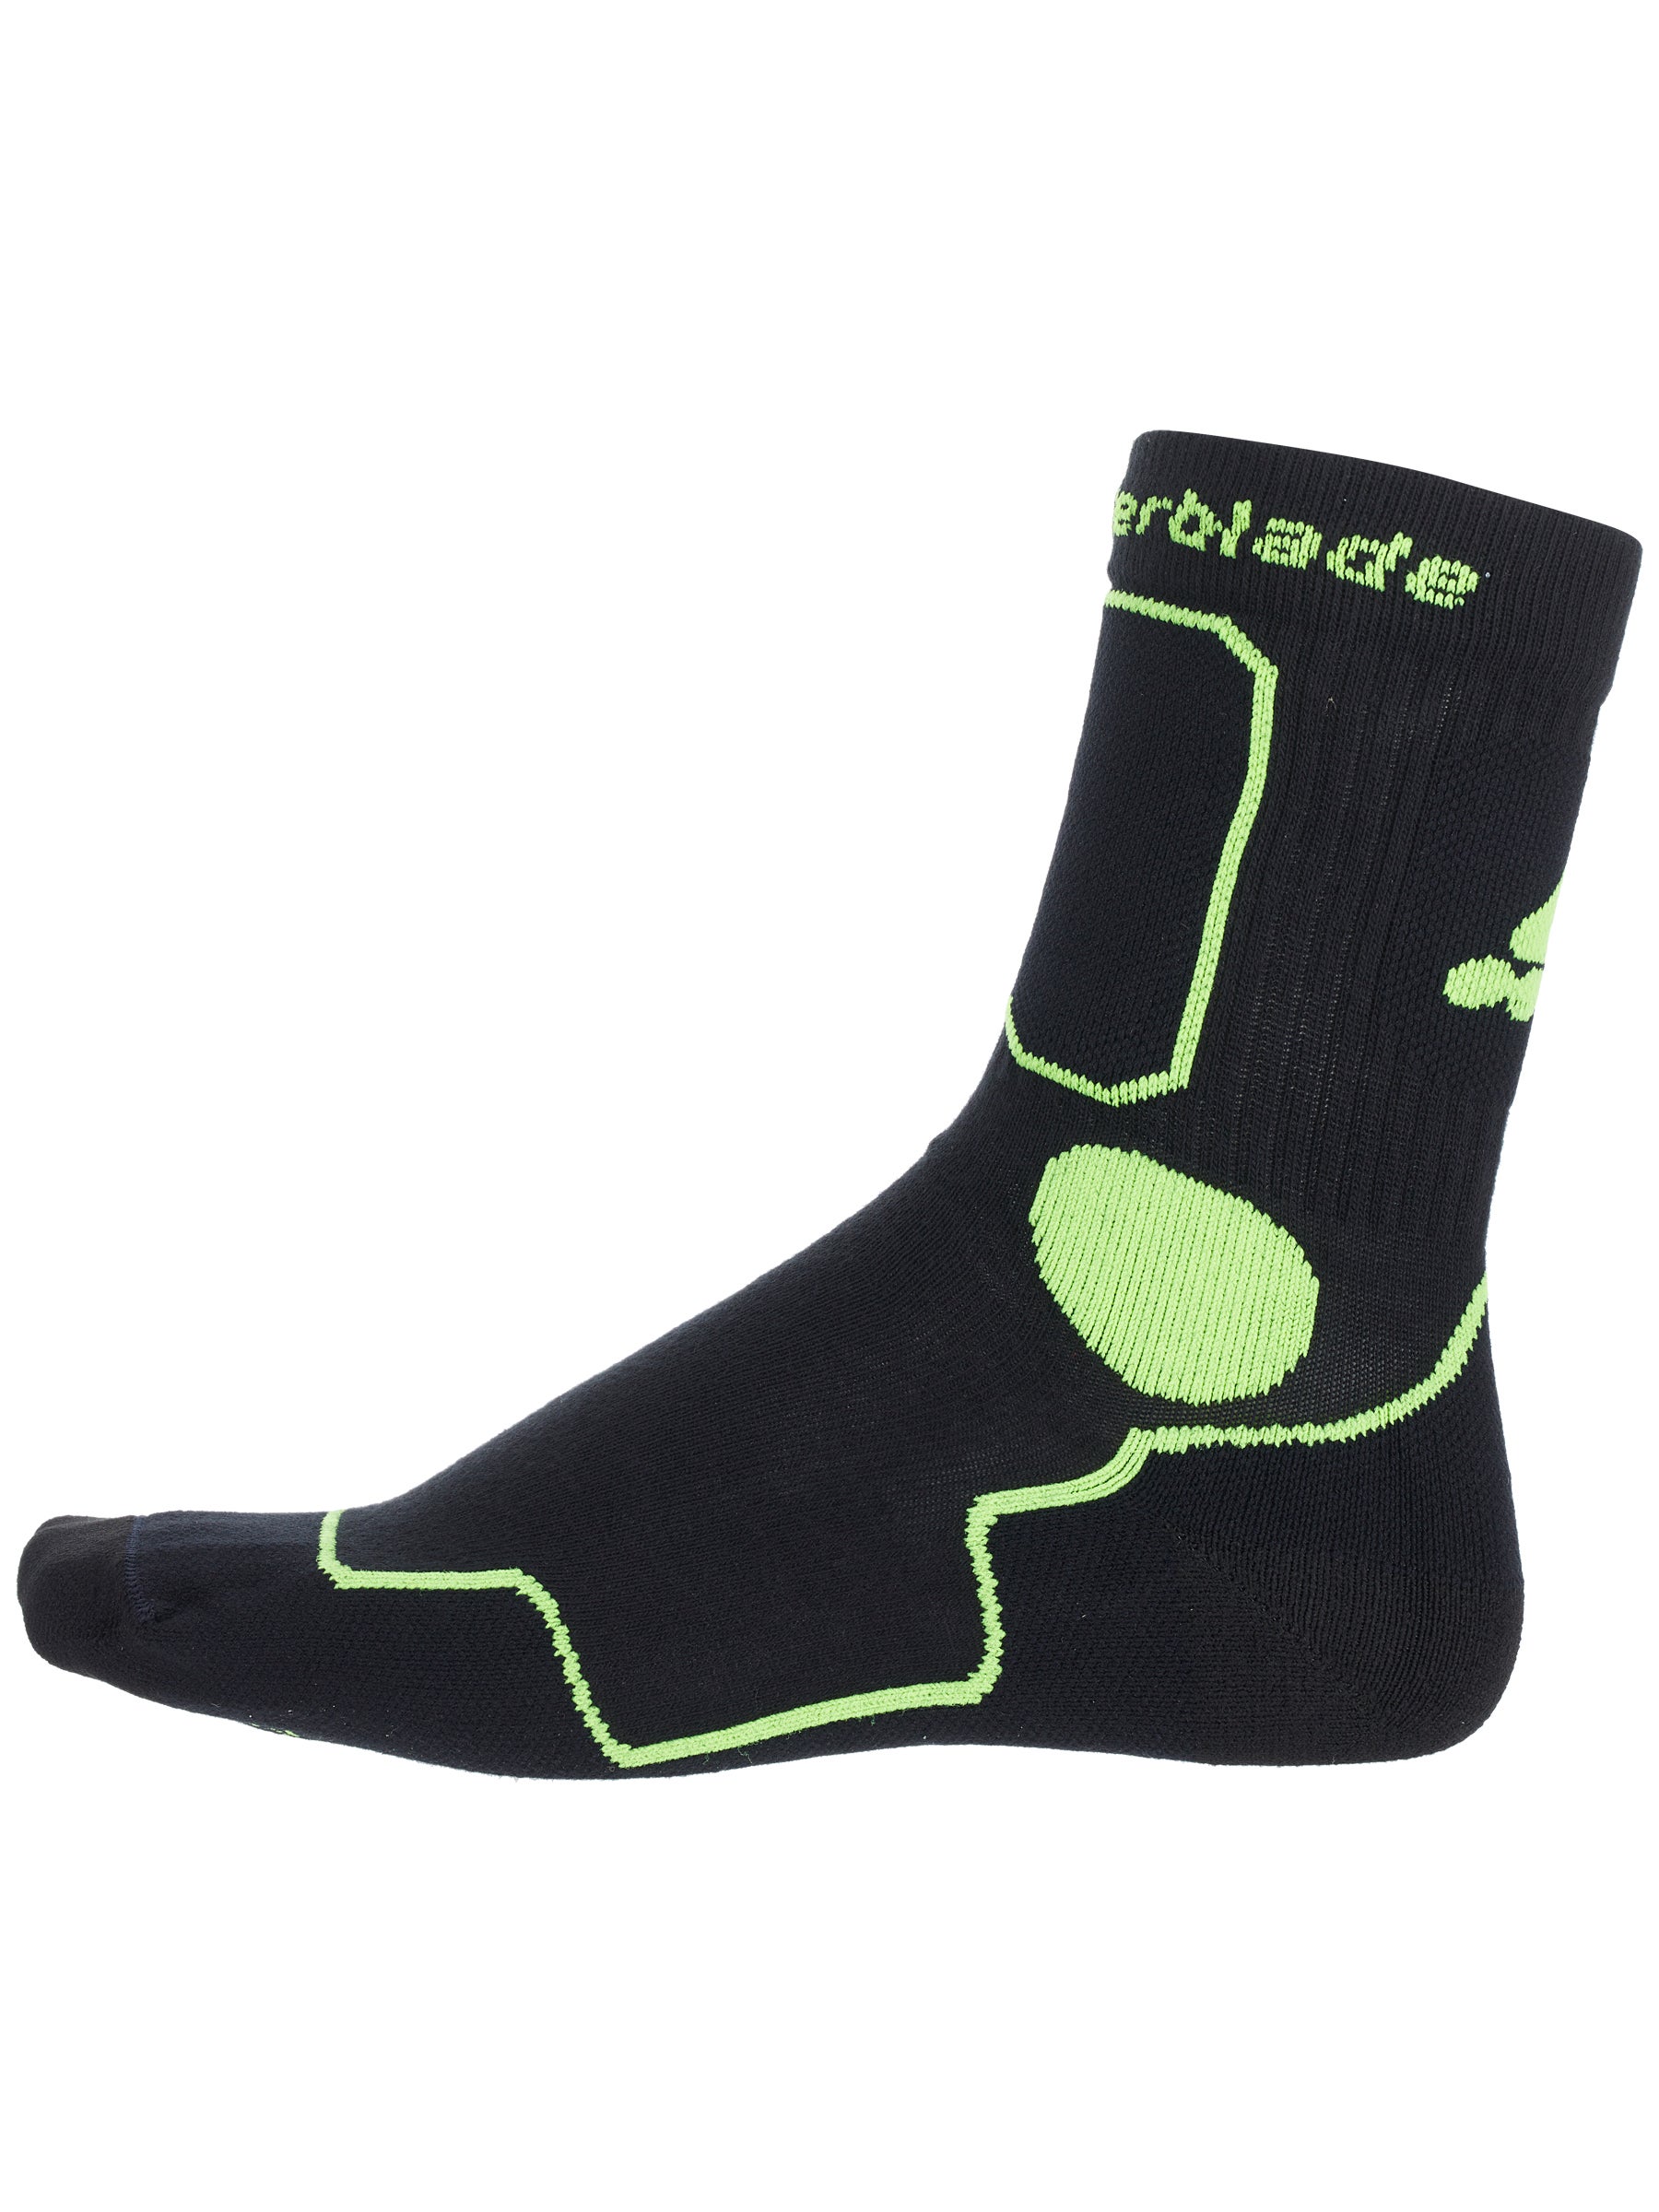 Rollerblade Boys SocksBlack Green Performance Sock NEW Size XS or S06A5680 